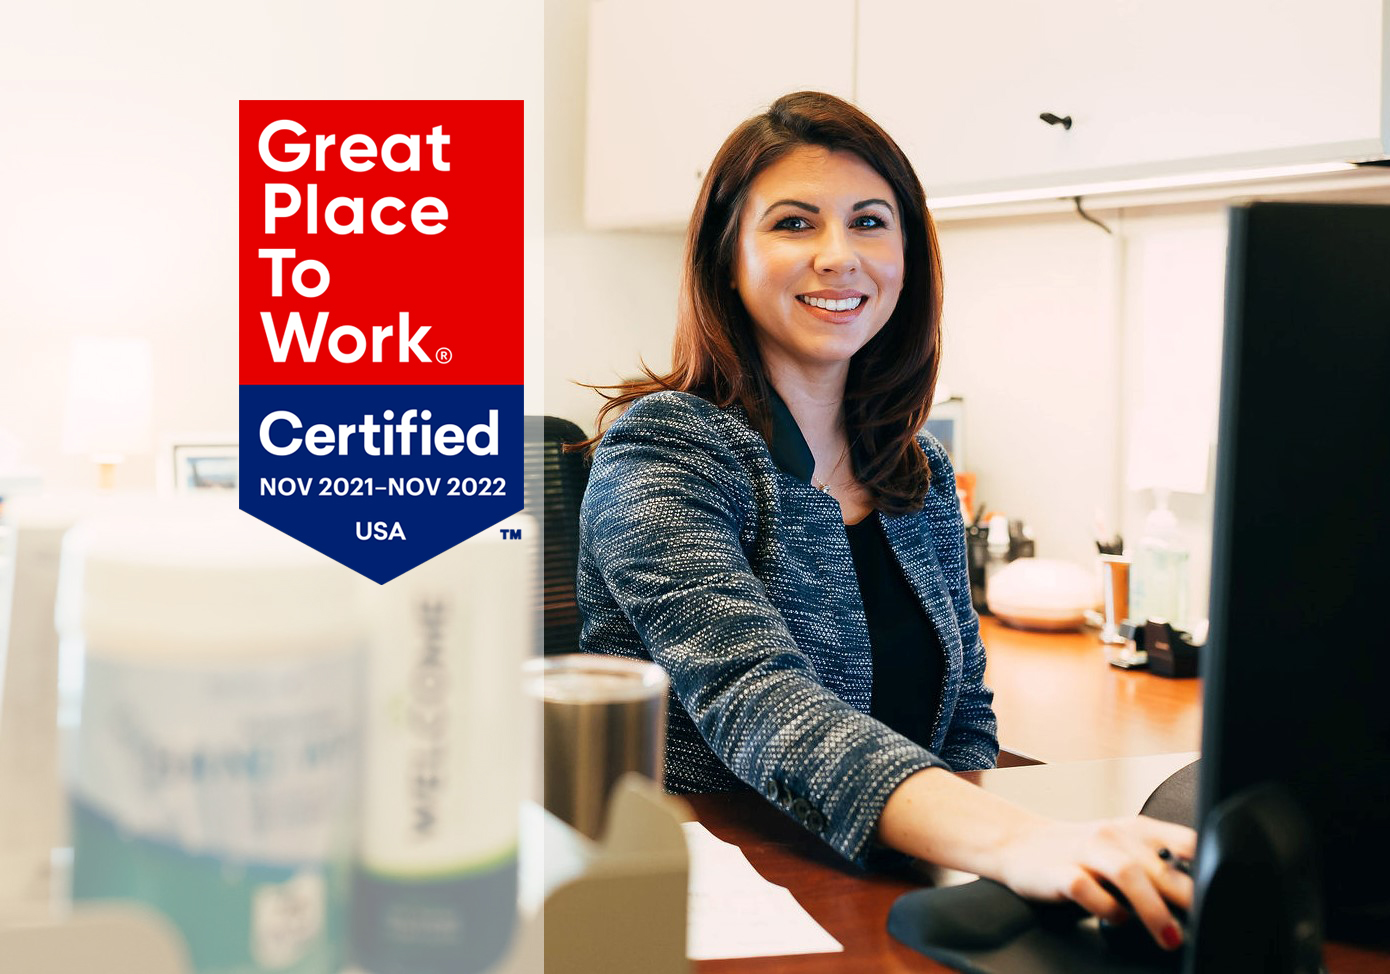 woman at computer with Great Place to Work banner